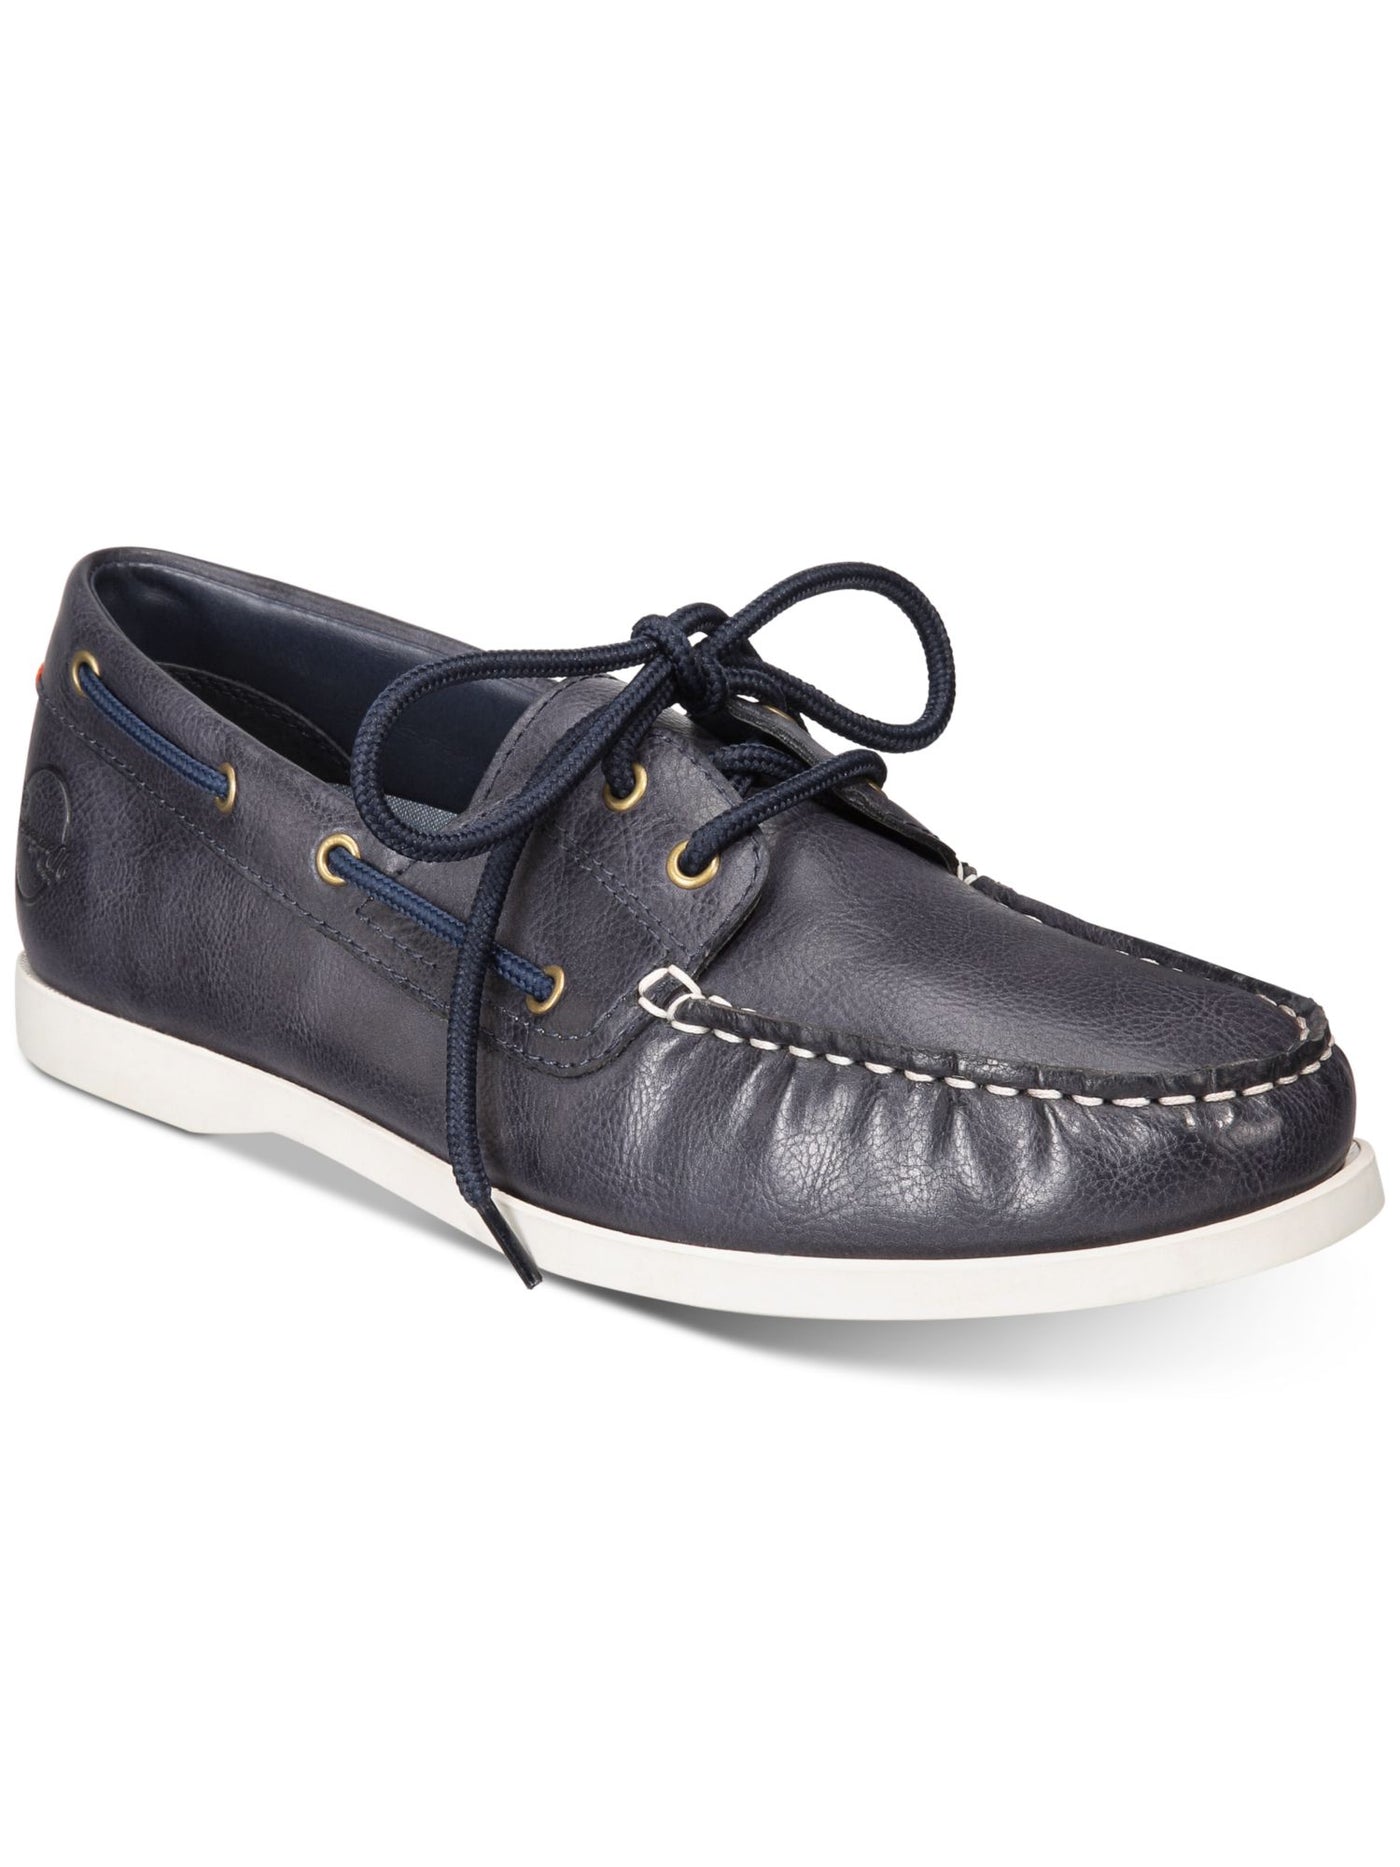 WEATHERPROOF VINTAGE Mens Navy Cushioned Benny Round Toe Lace-Up Boat Shoes 10 M